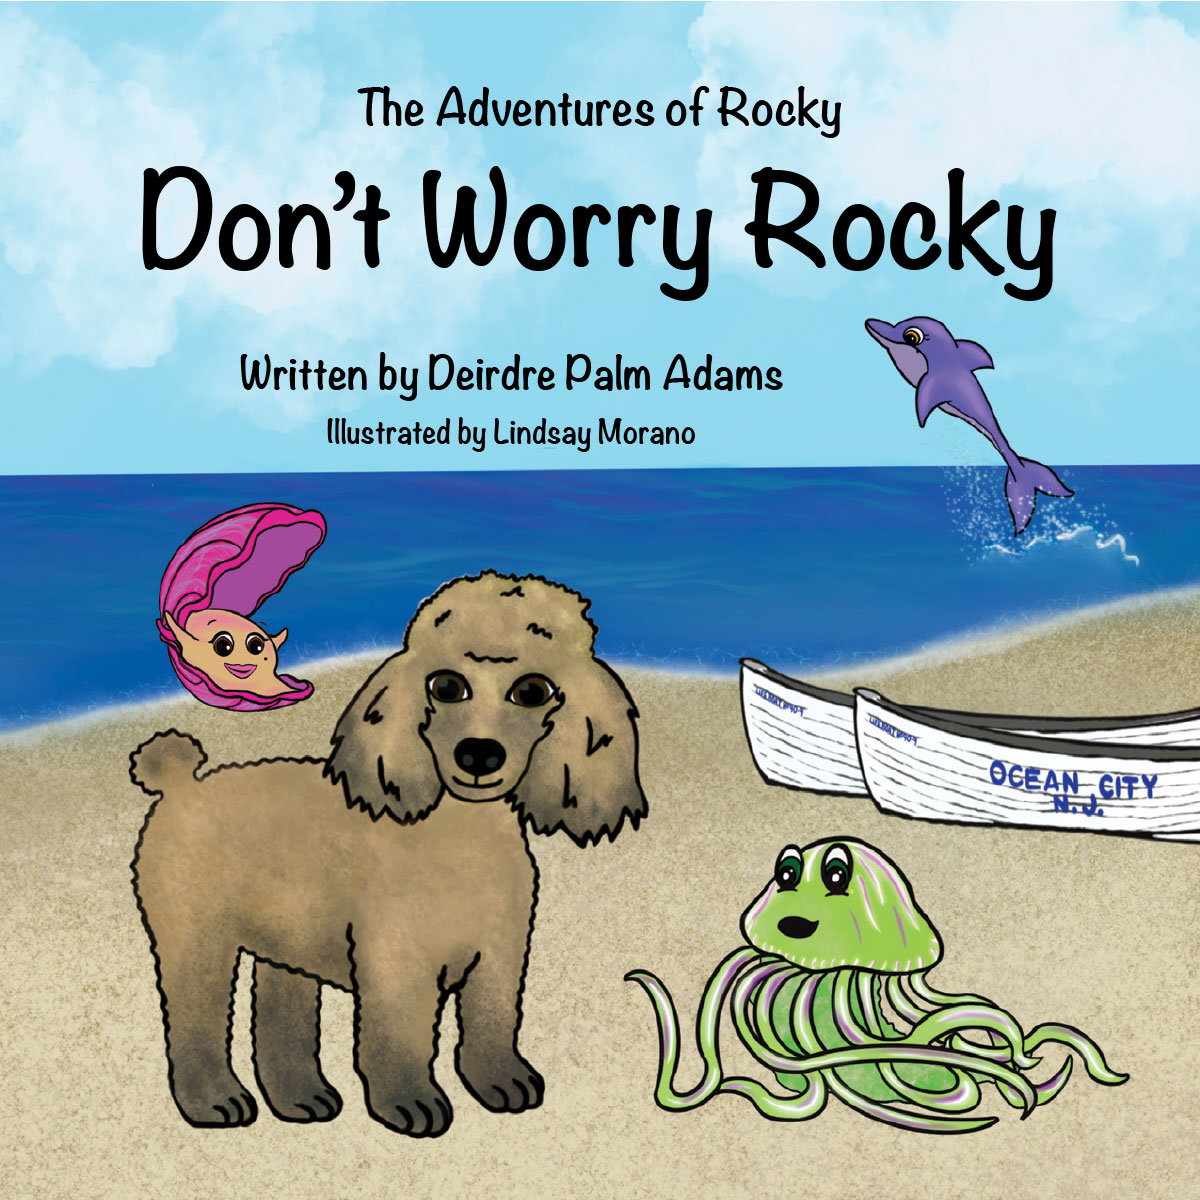 The Adventures of Rocky: Don't Worry Rocky by Deirdre Palm Adams Book Cover